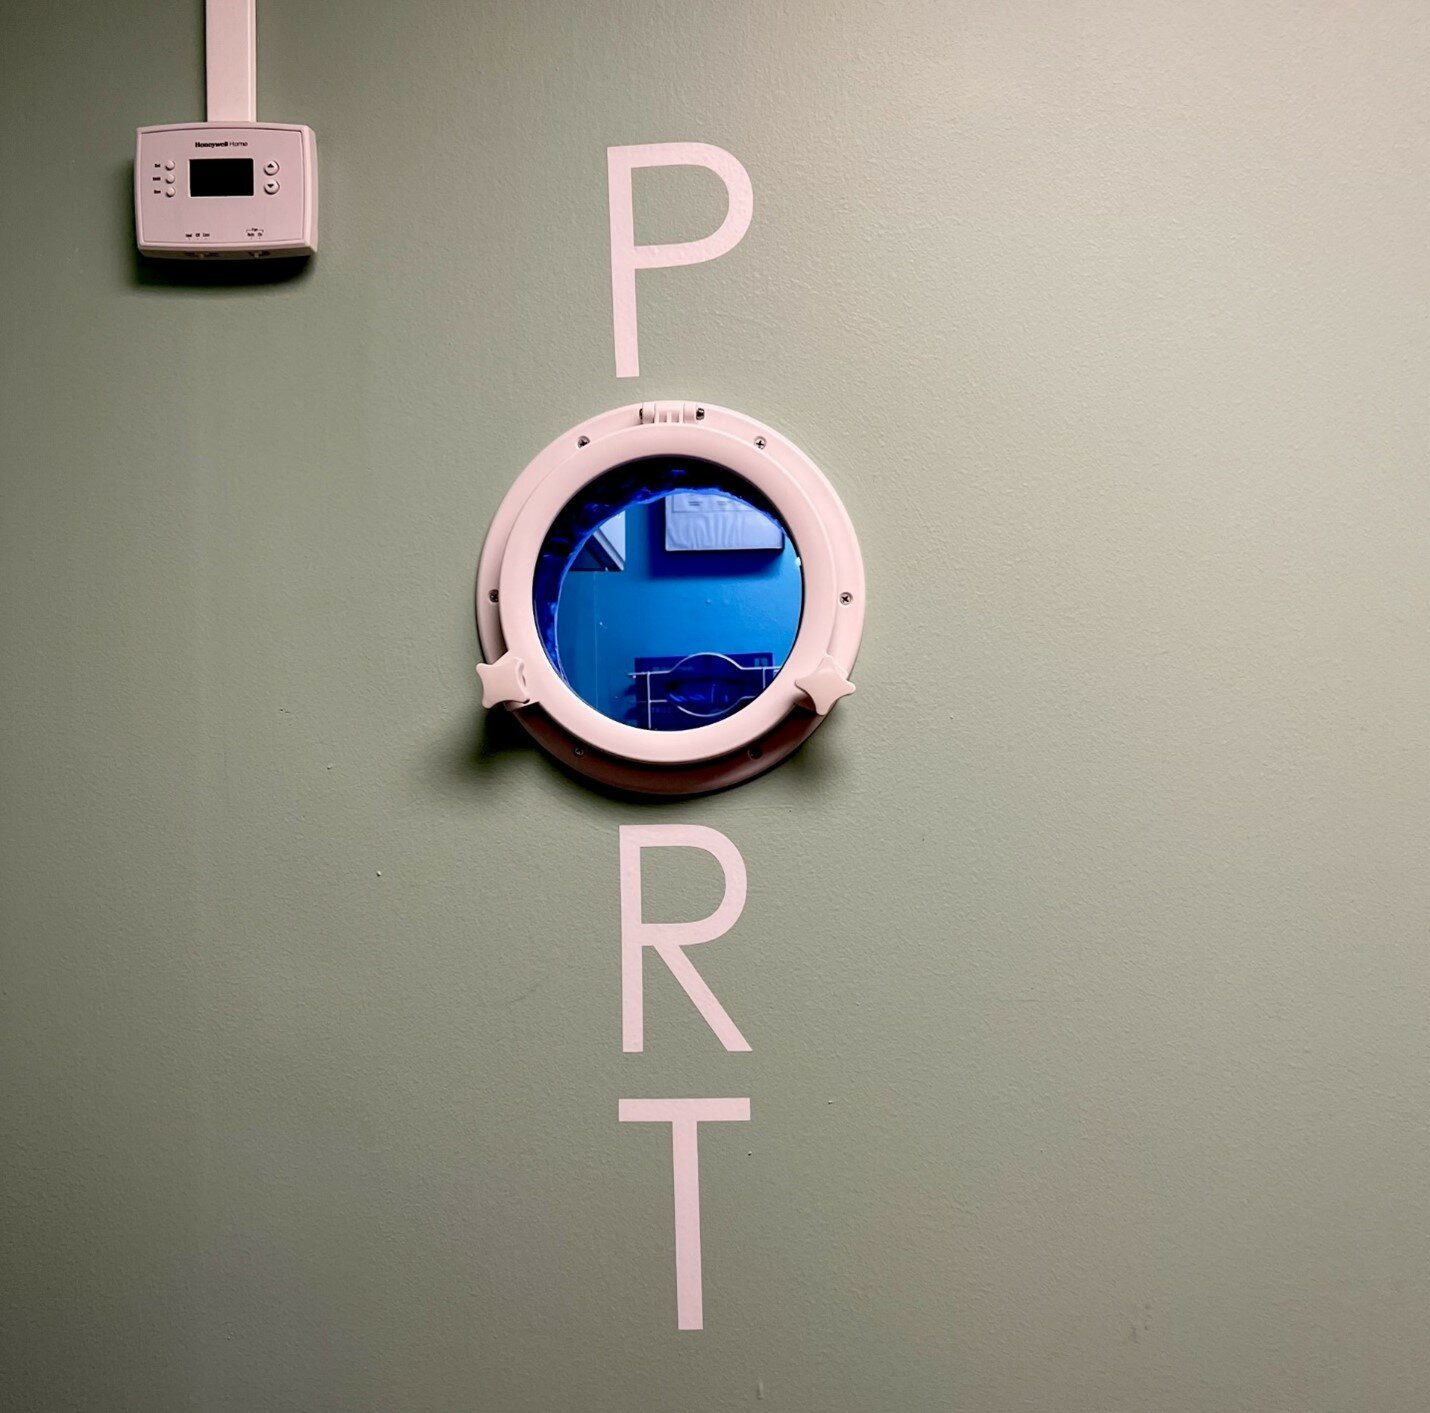 This clever porthole allows clients a view into the 'bio' room. As only personnel with training can legally enter, this gives a unique opportunity for those interested to view the autoclave and ultrasonics, how tools are processed, and where the chemicals are stored.